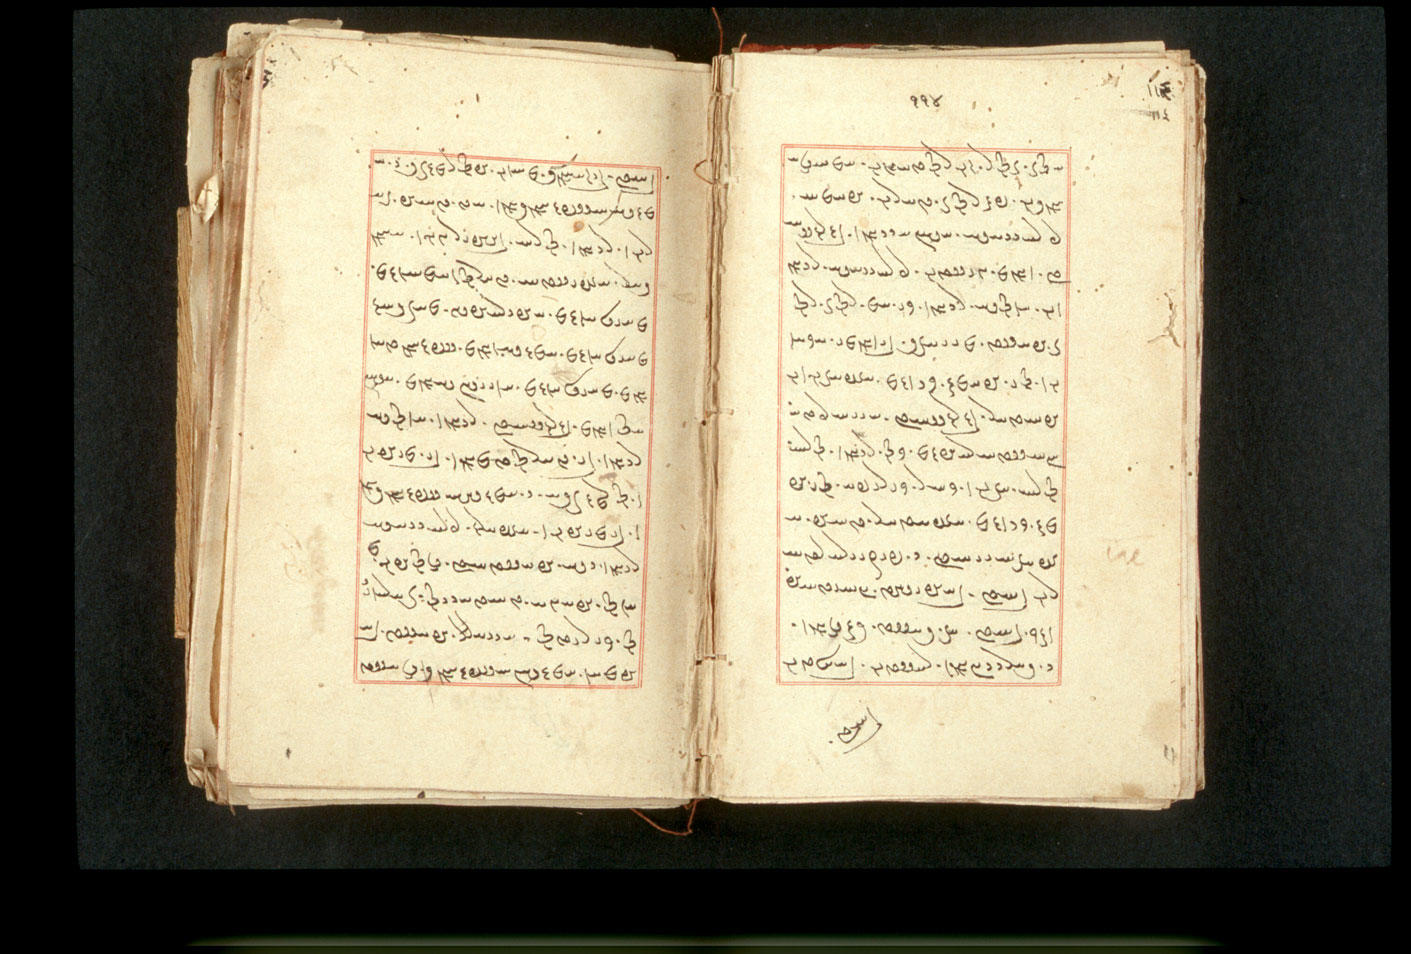 Folios 114v (right) and 115r (left)